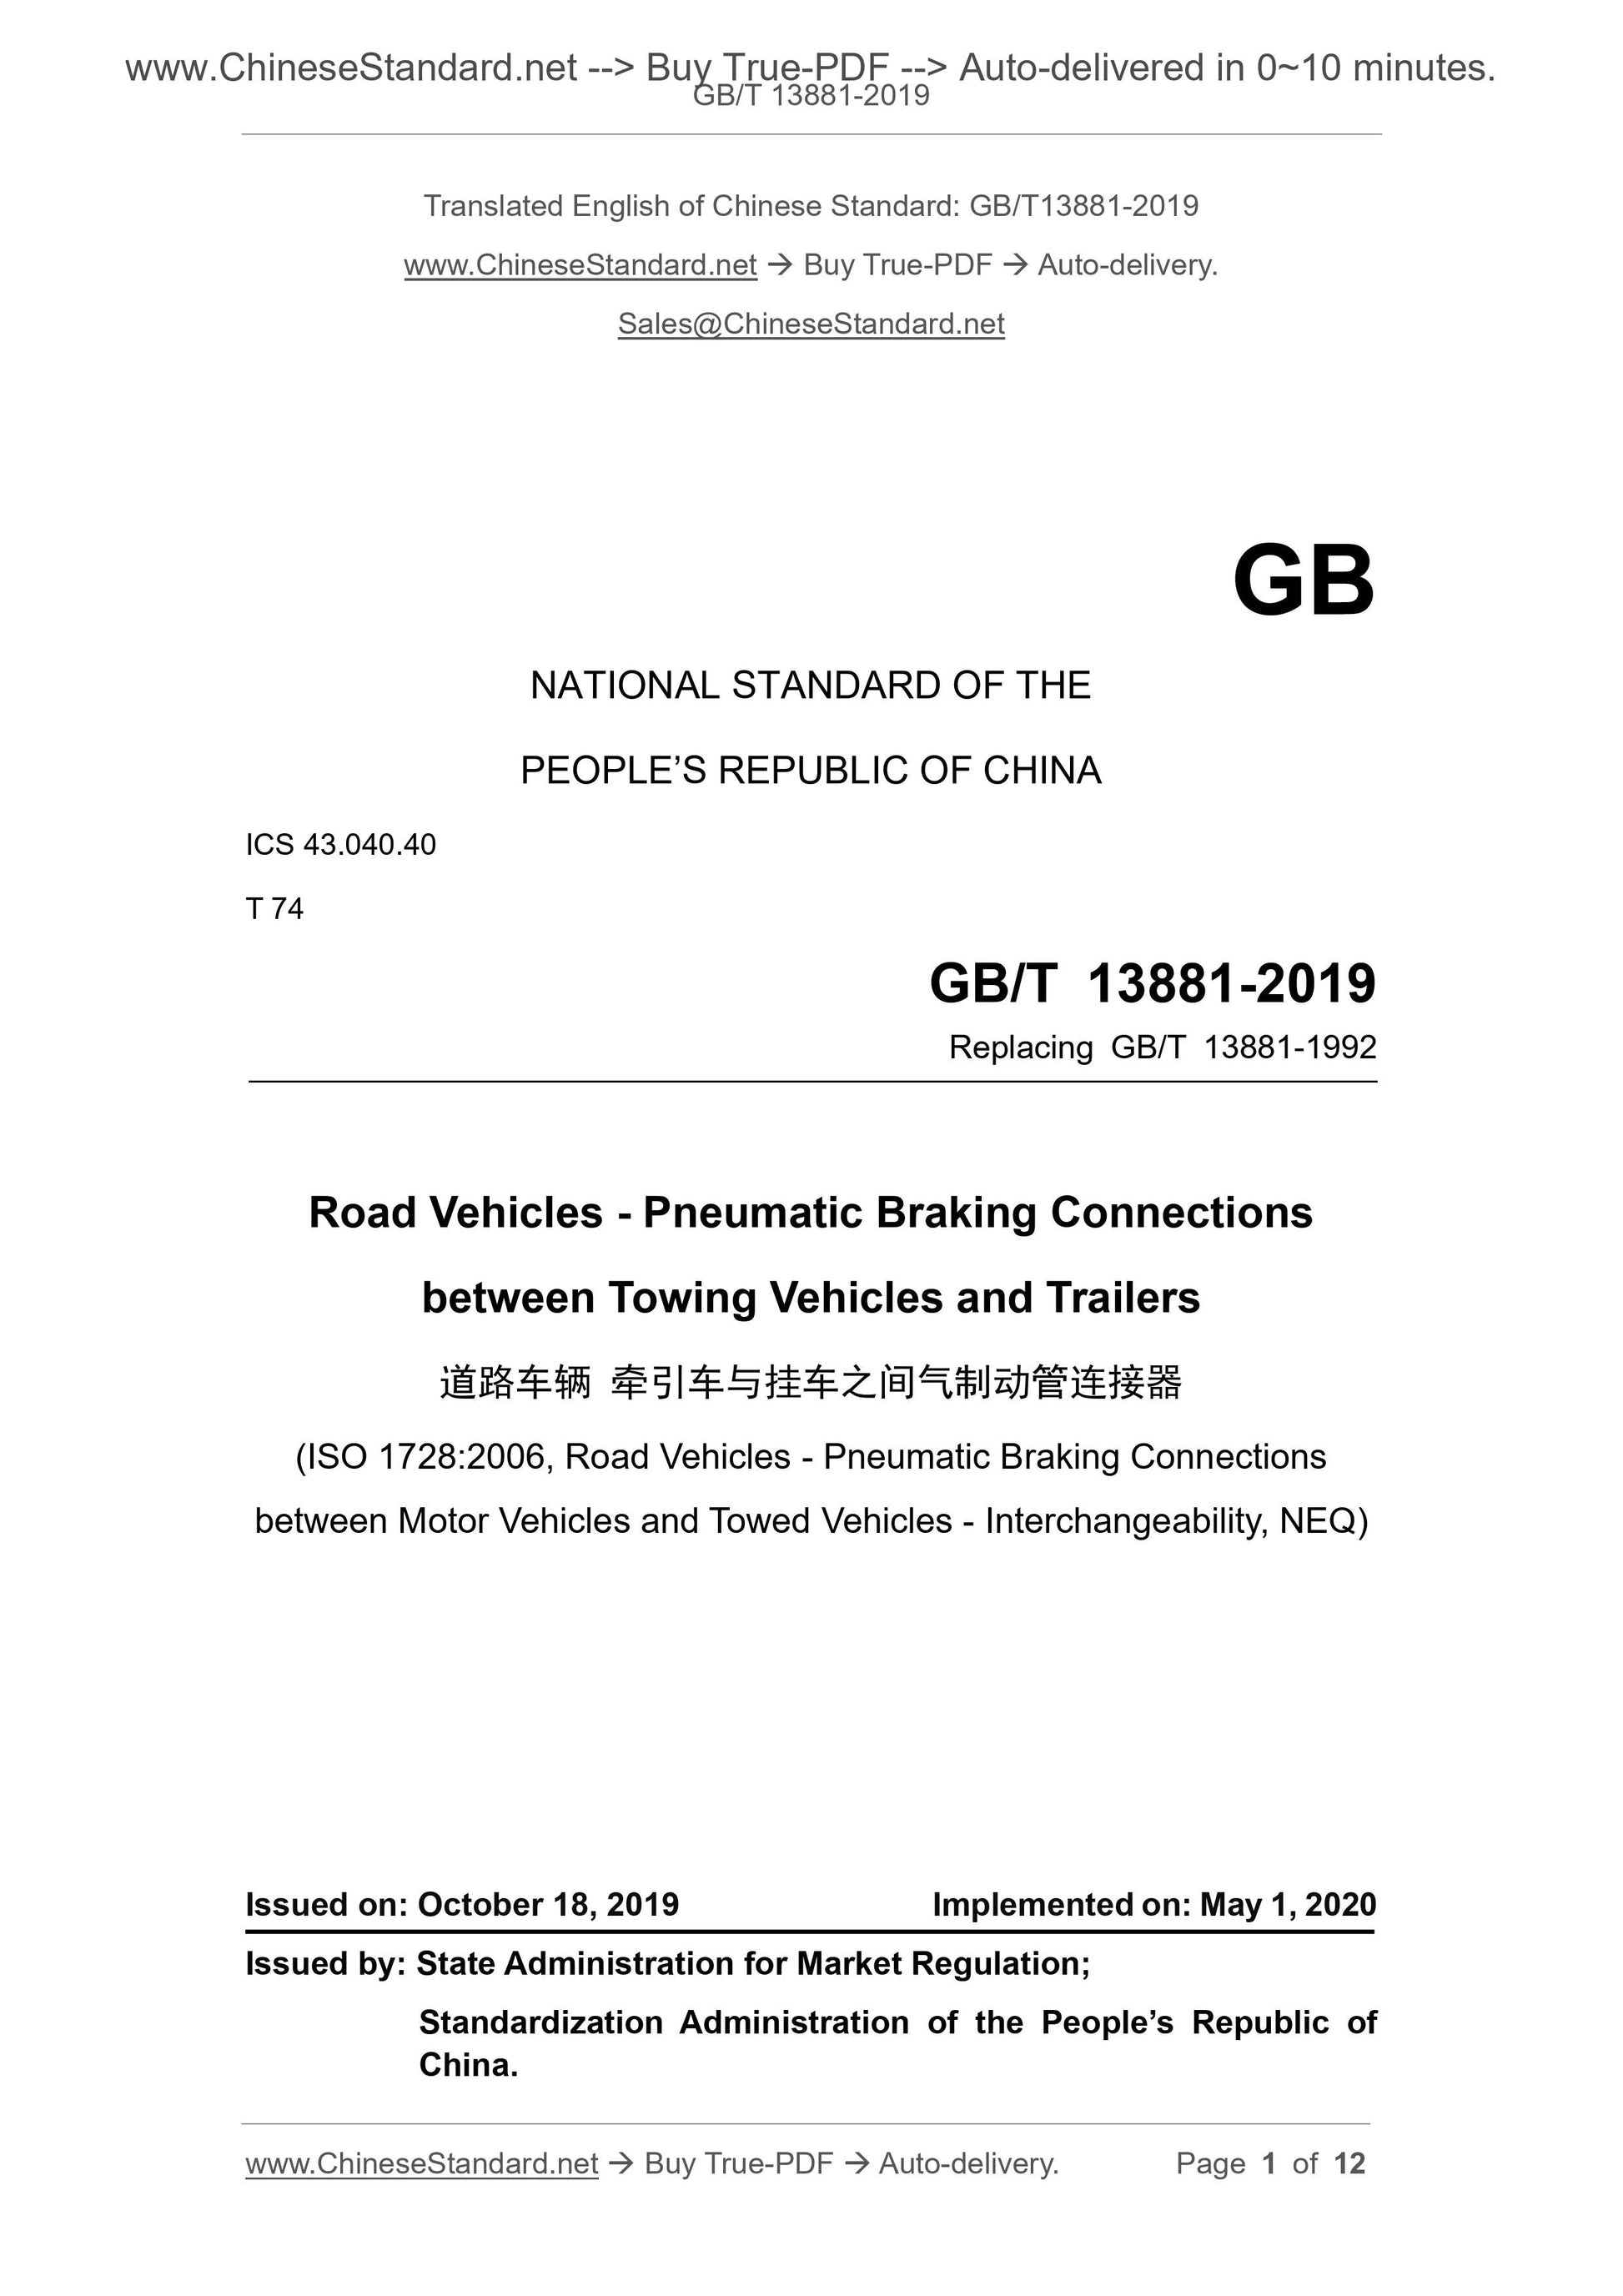 GB/T 13881-2019 Page 1